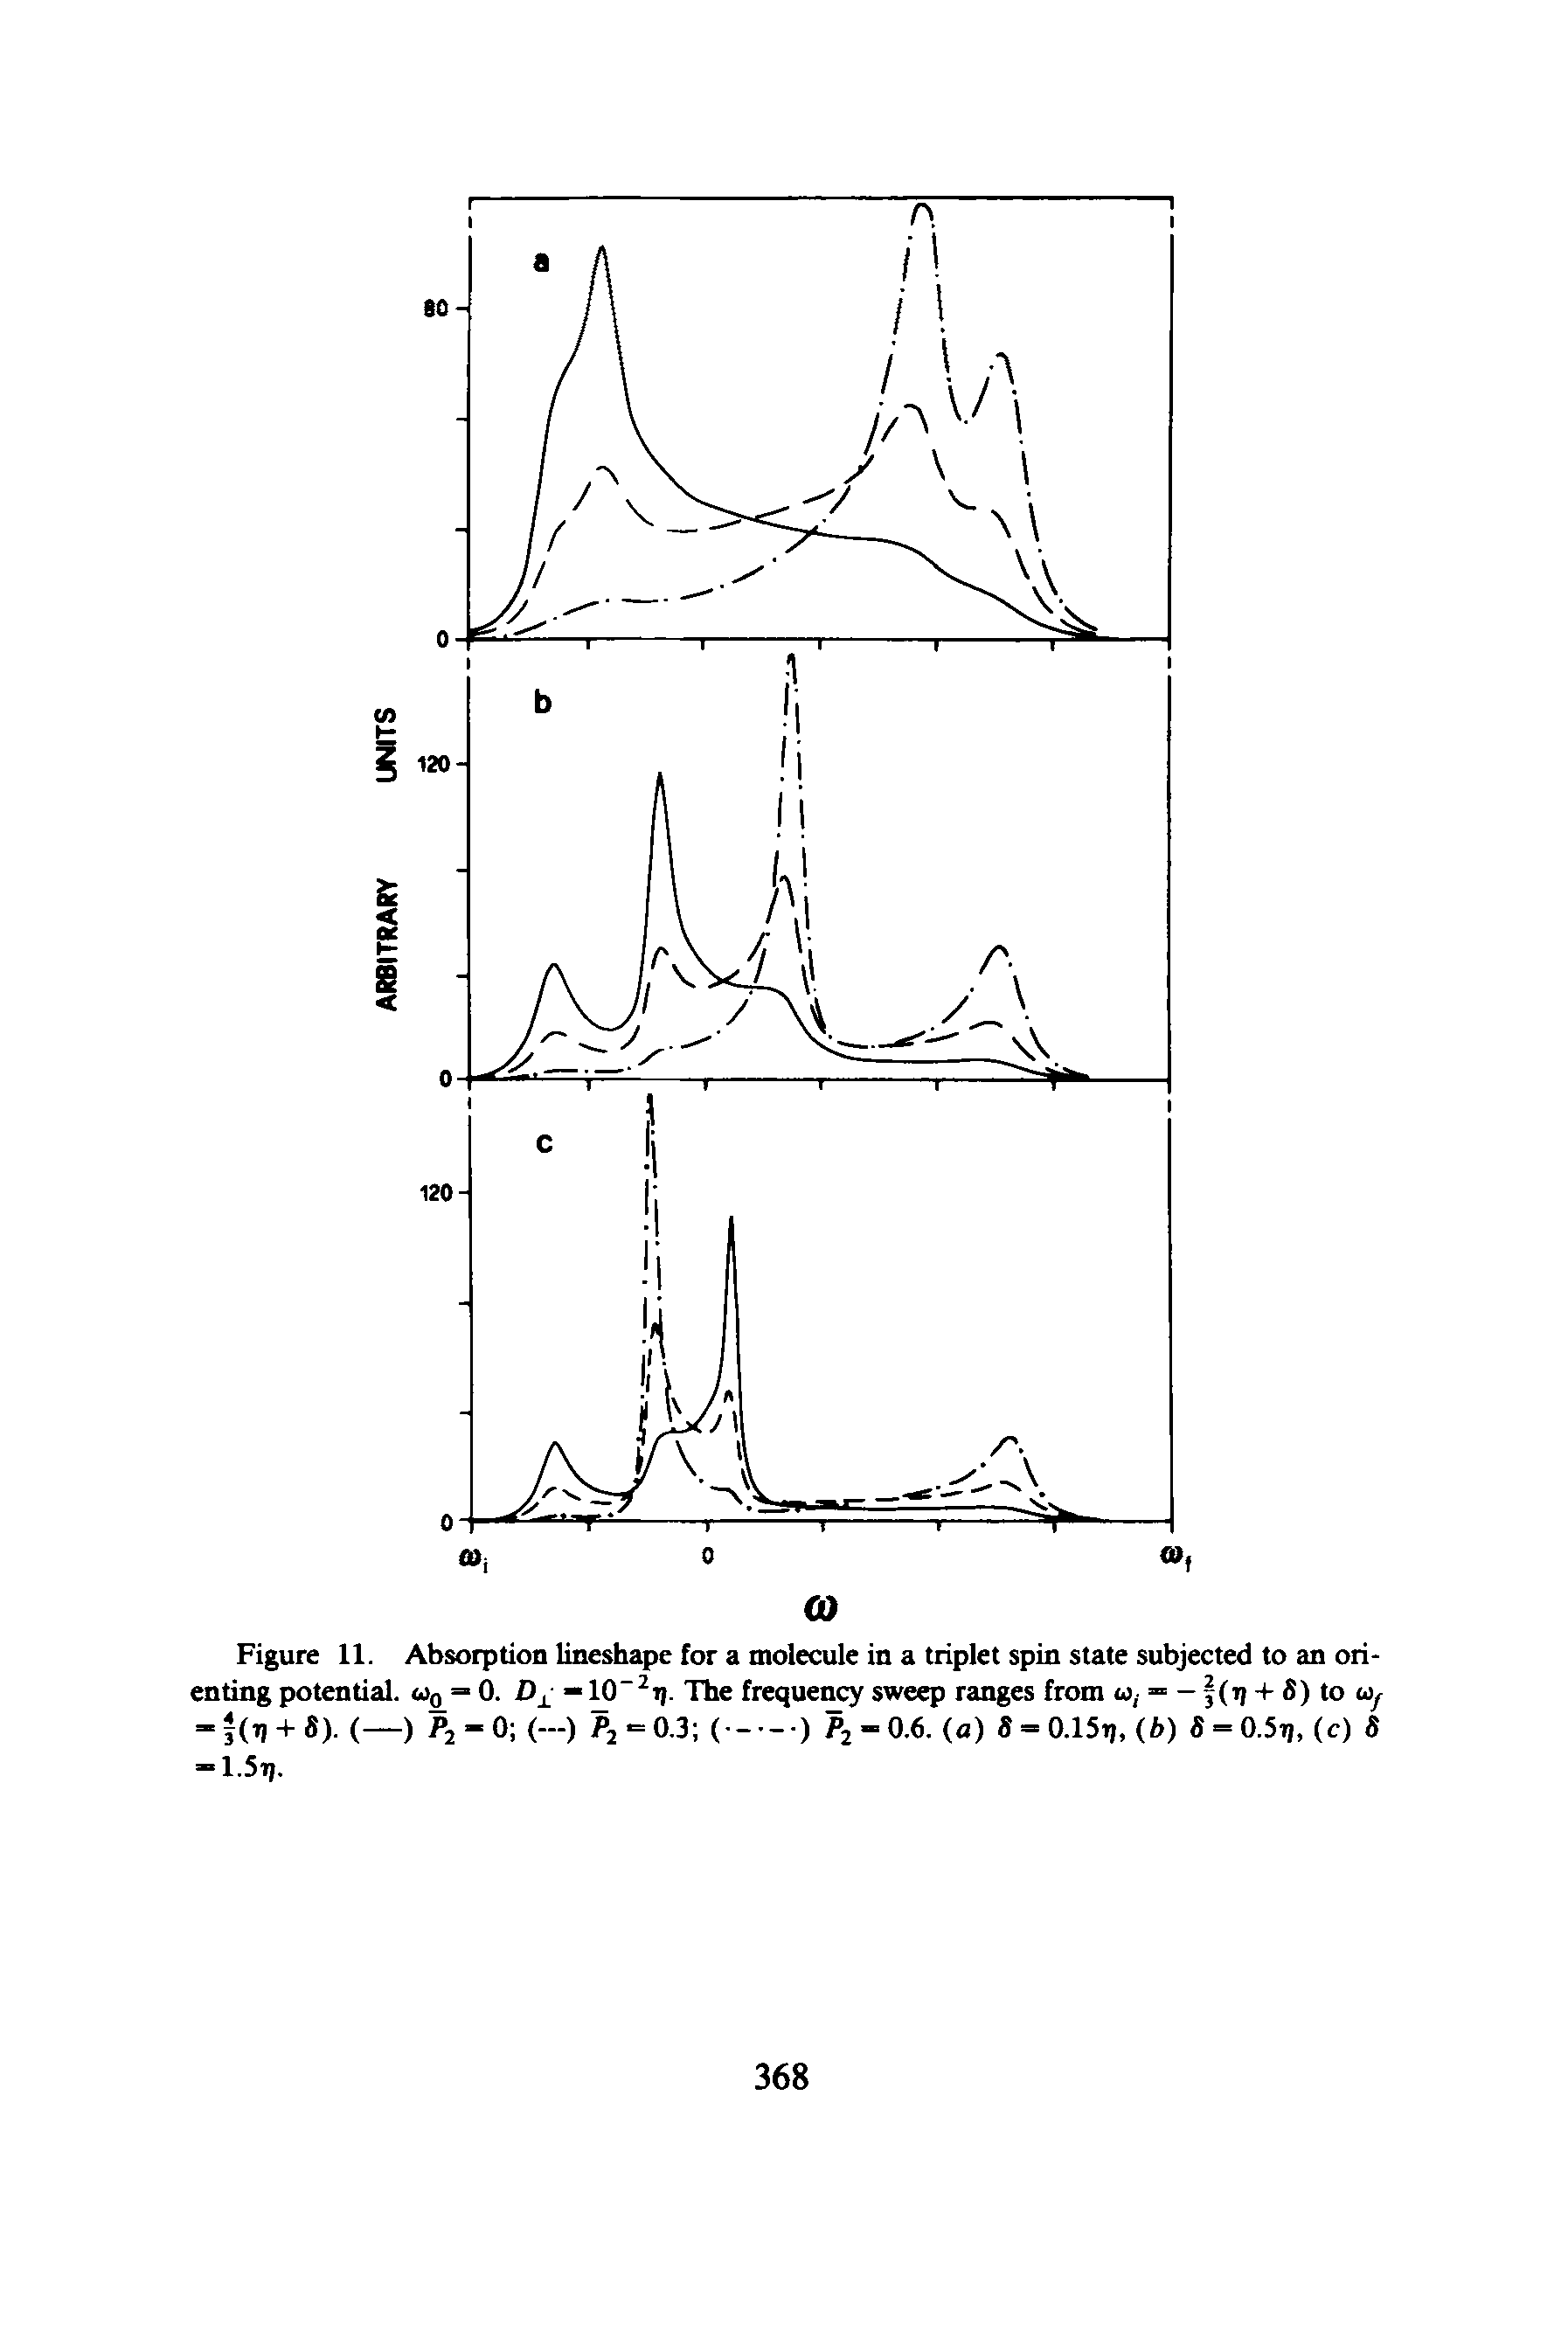 Figure 11. Absorption lineshape for a molecule in a triplet spin state subjected to an orienting potential. Ug = 0. D — 10 t. The frequency sweep ranges from u,- — (i) -f S) to ay...